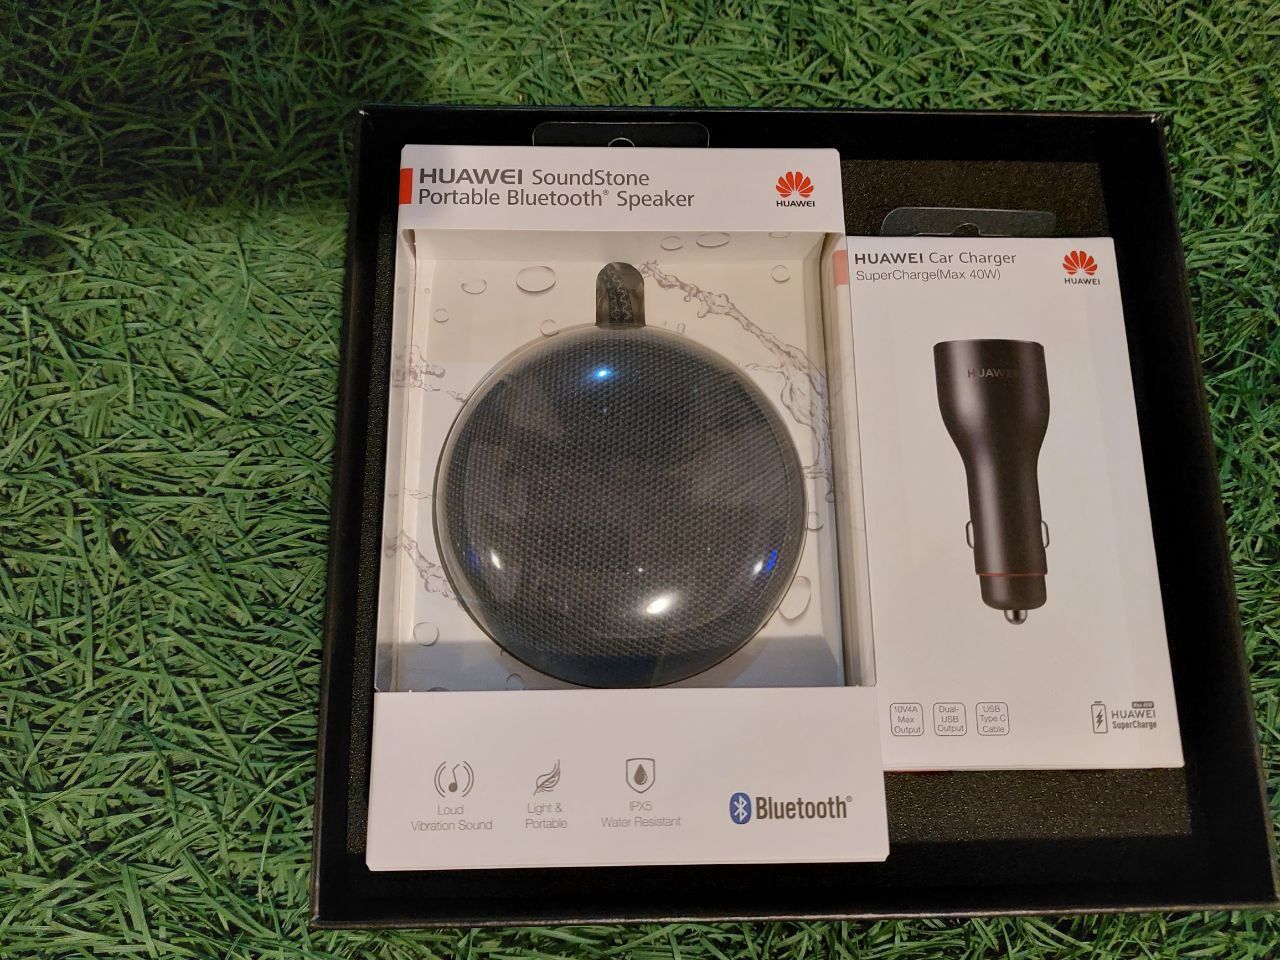 Huawei soundstone portable speaker and Huawei car charger подарочные